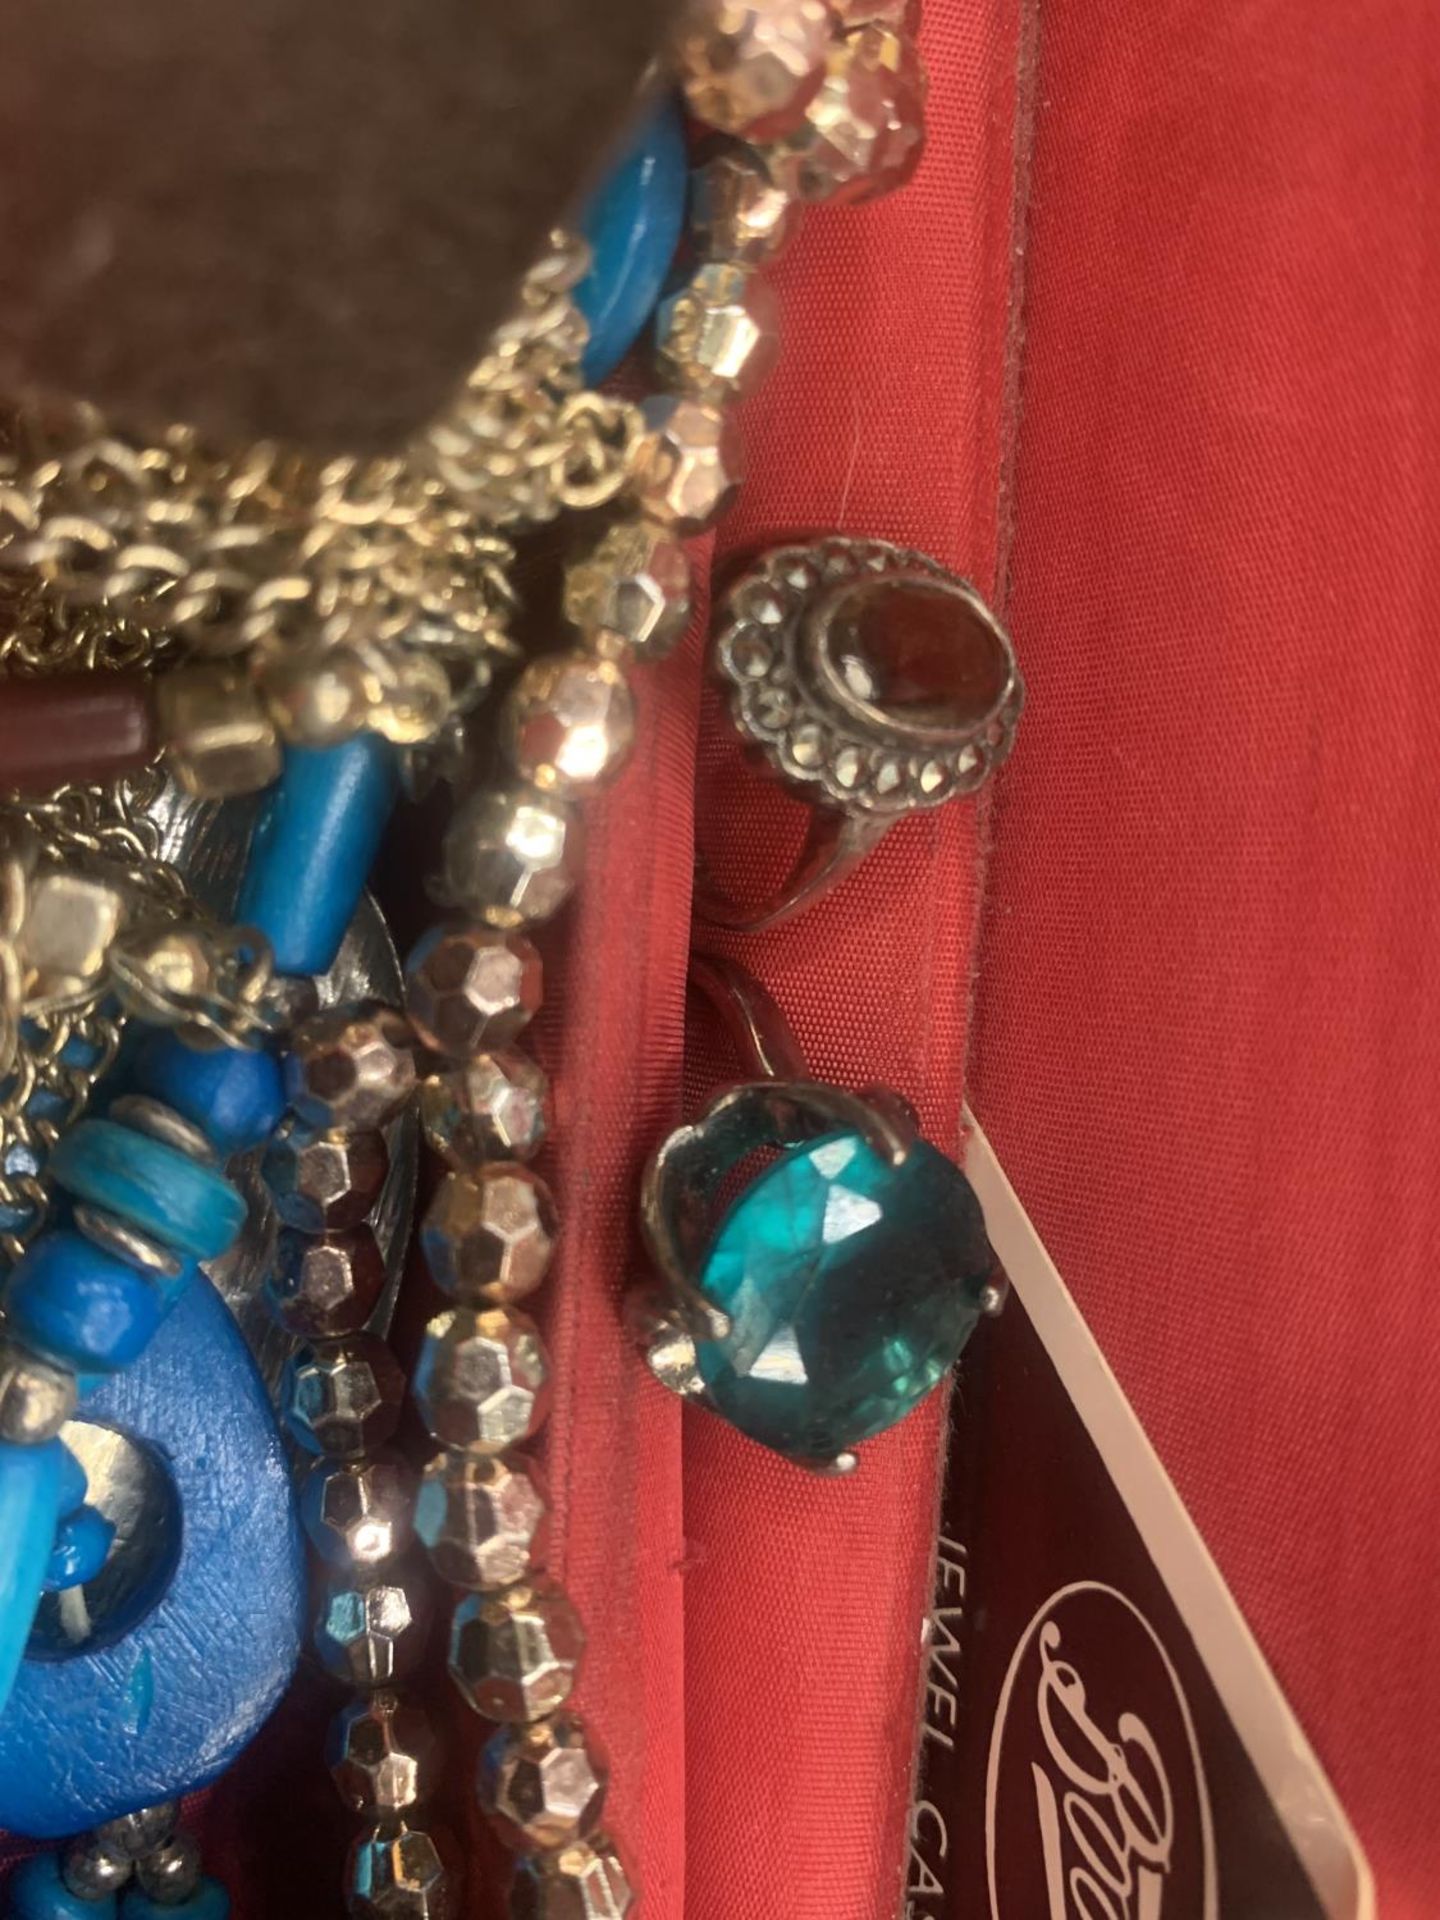 A QUANTITY OF VINTAGE COSTUME JEWELLERY TO INCLUDE RINGS, NECKLACES, ETC IN A JEWELLERY CASE - Image 2 of 4